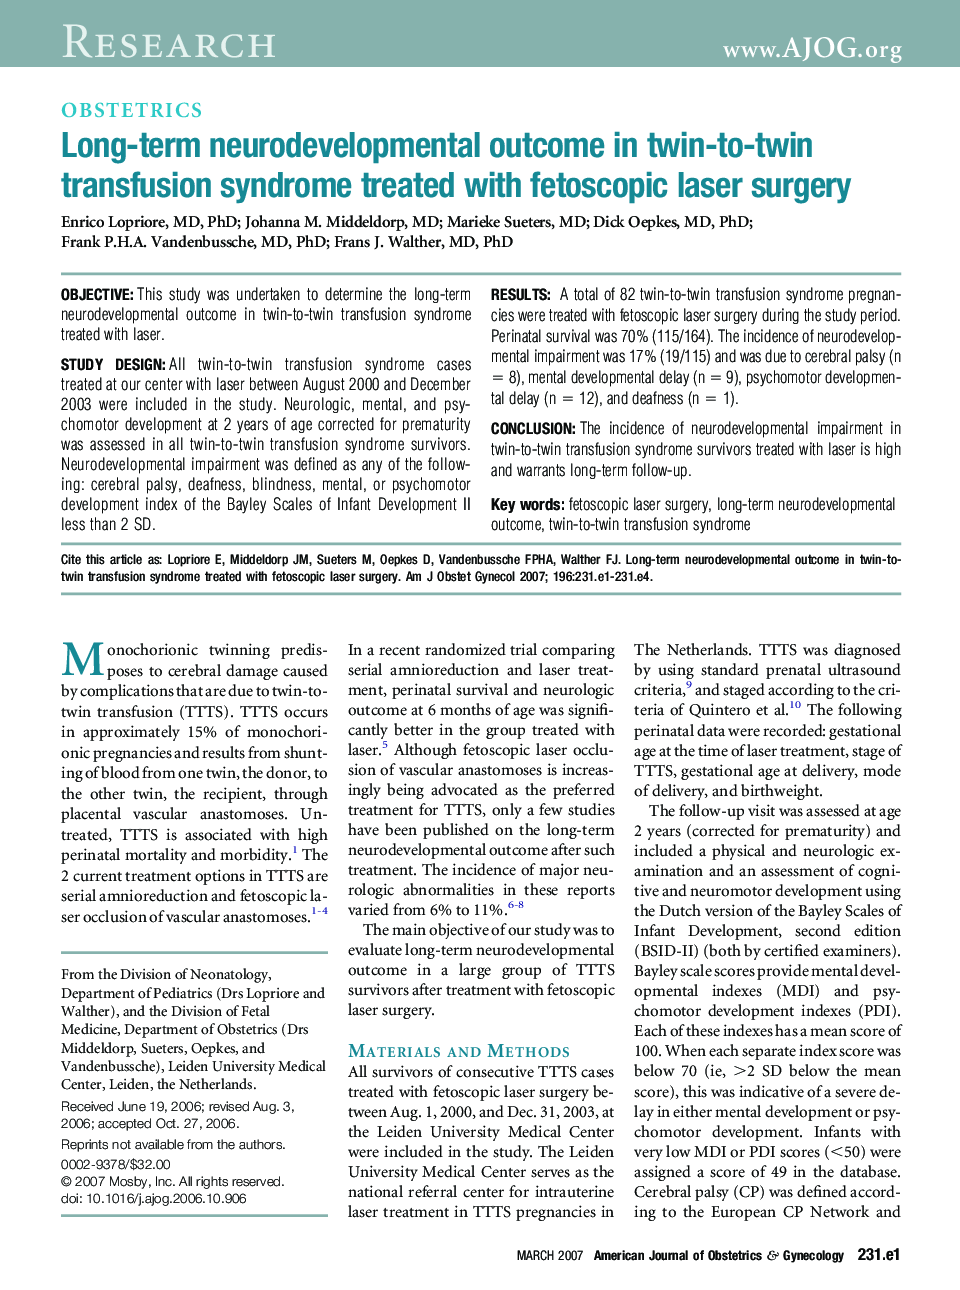 Long-term neurodevelopmental outcome in twin-to-twin transfusion syndrome treated with fetoscopic laser surgery